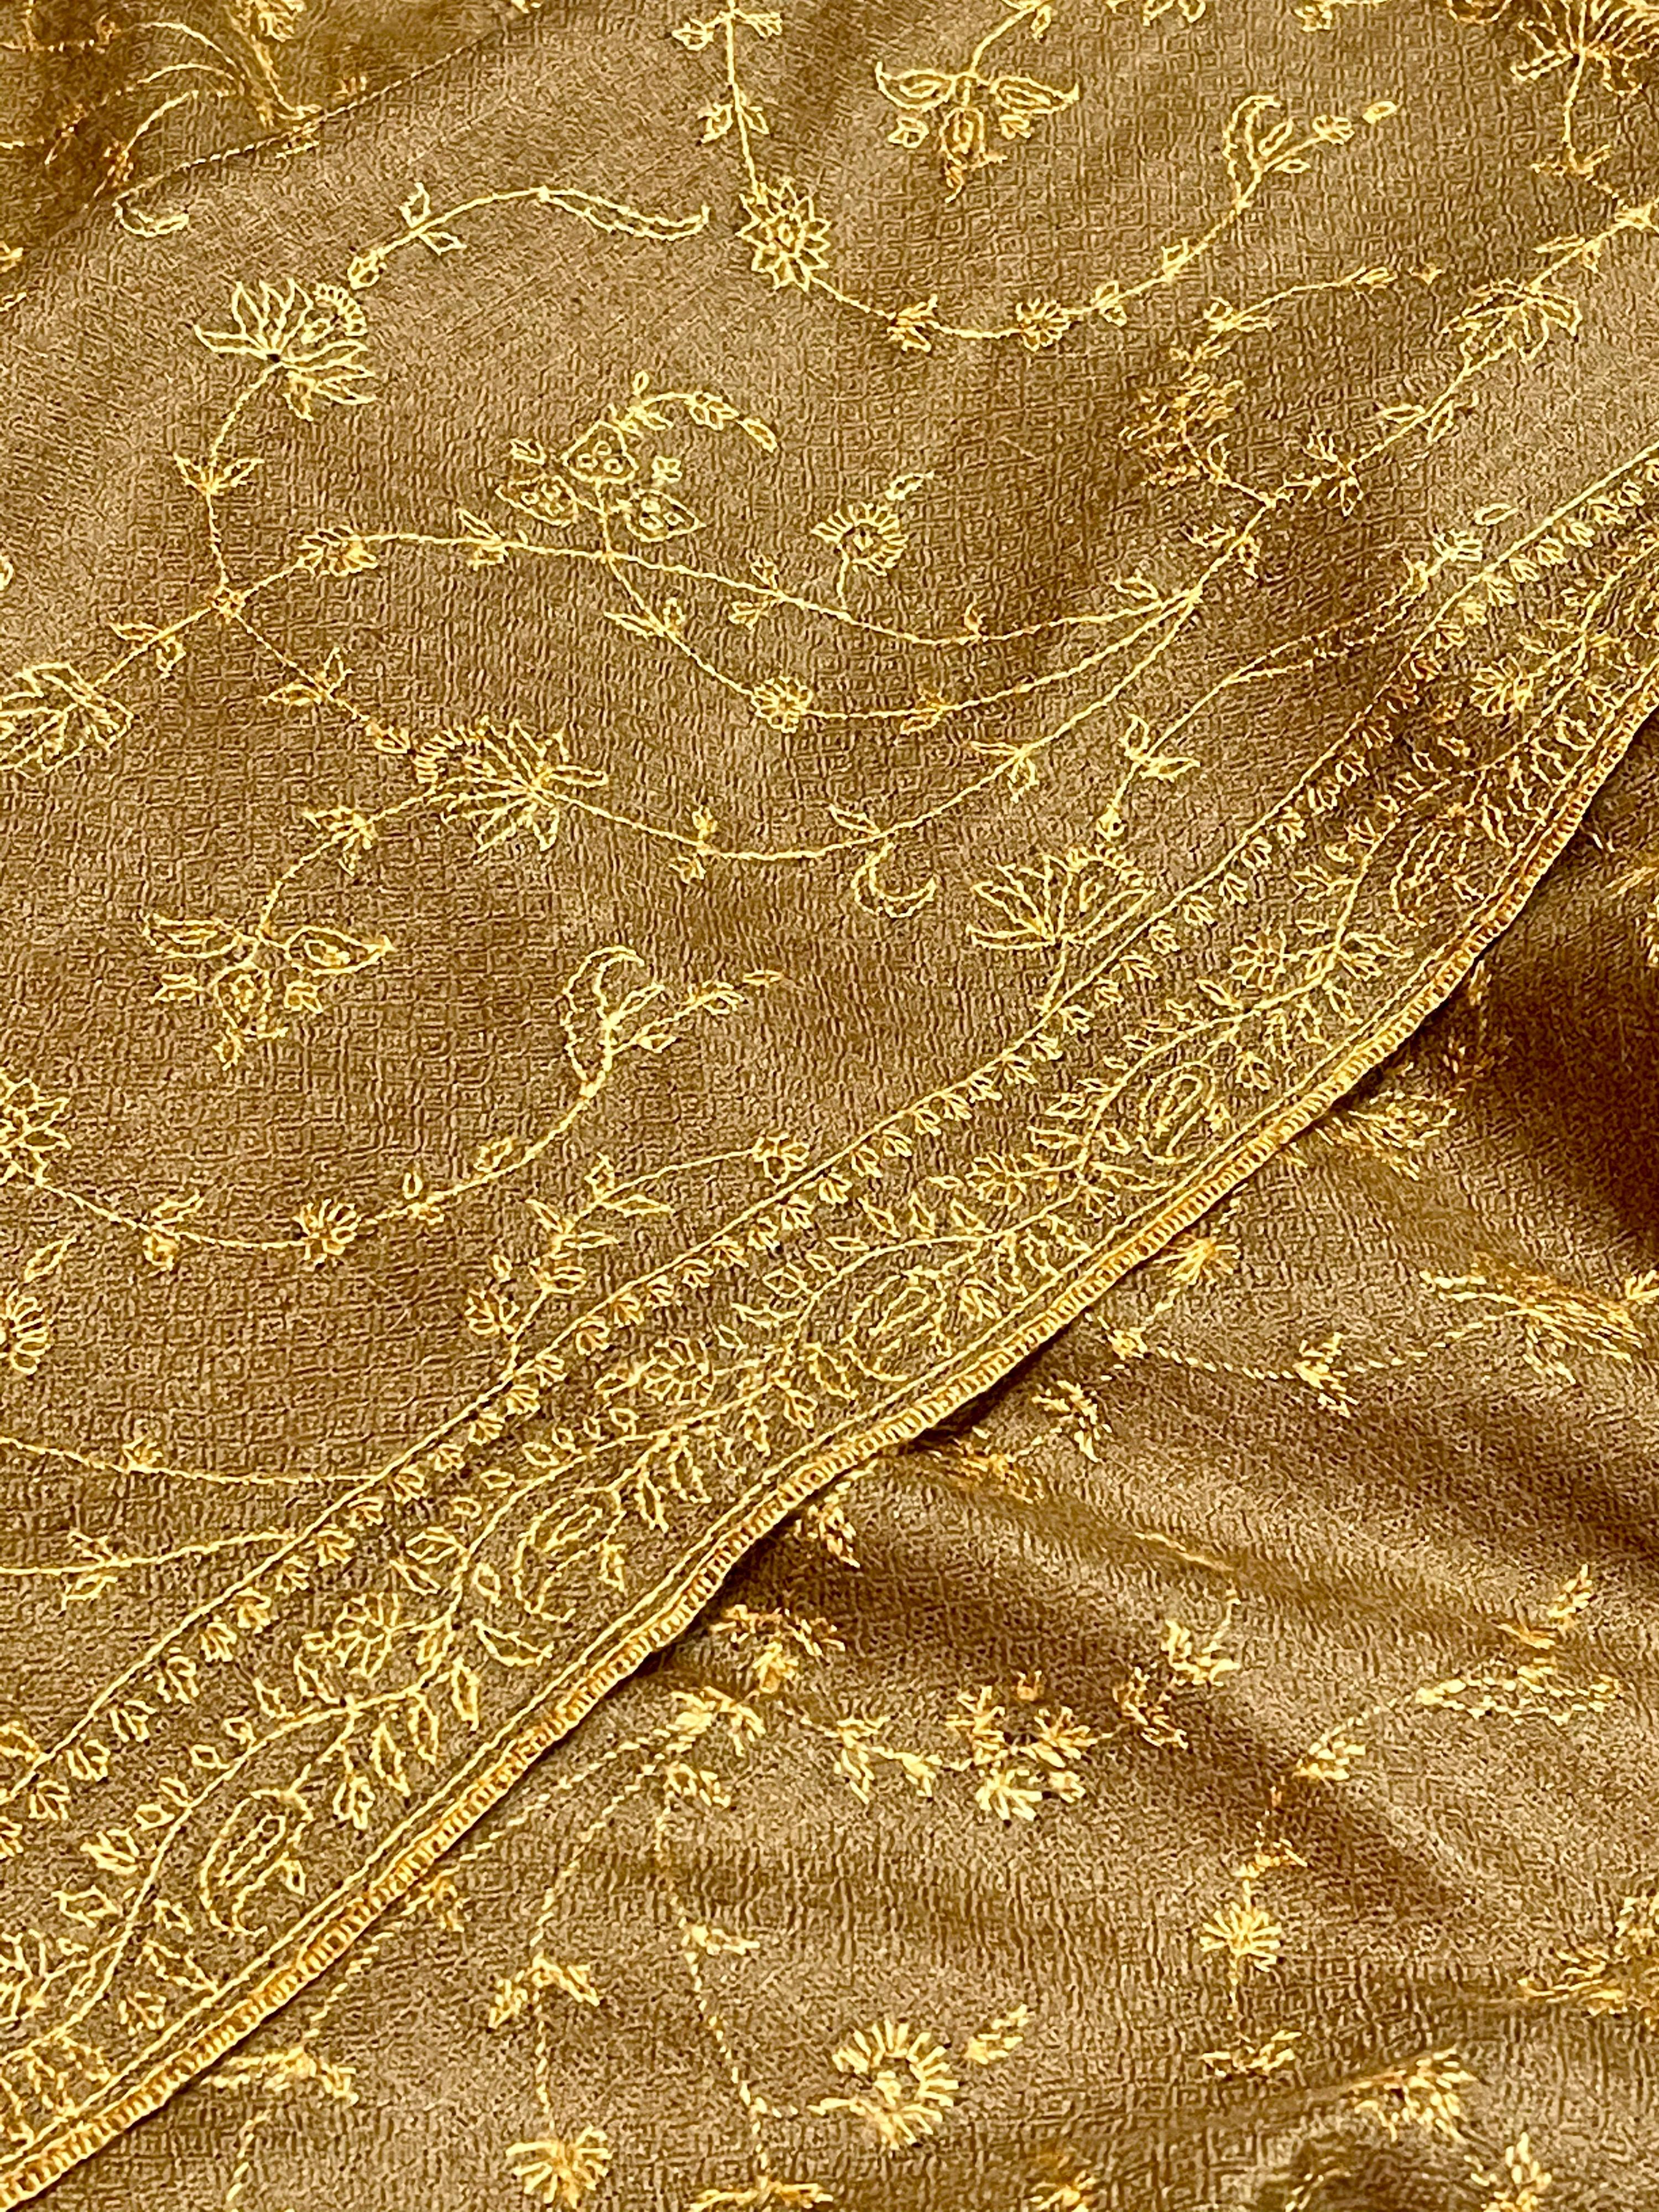 Hand Embroidered 100% Cashmere Pashmina Shawl Golden Brown Made in Kashmir  5